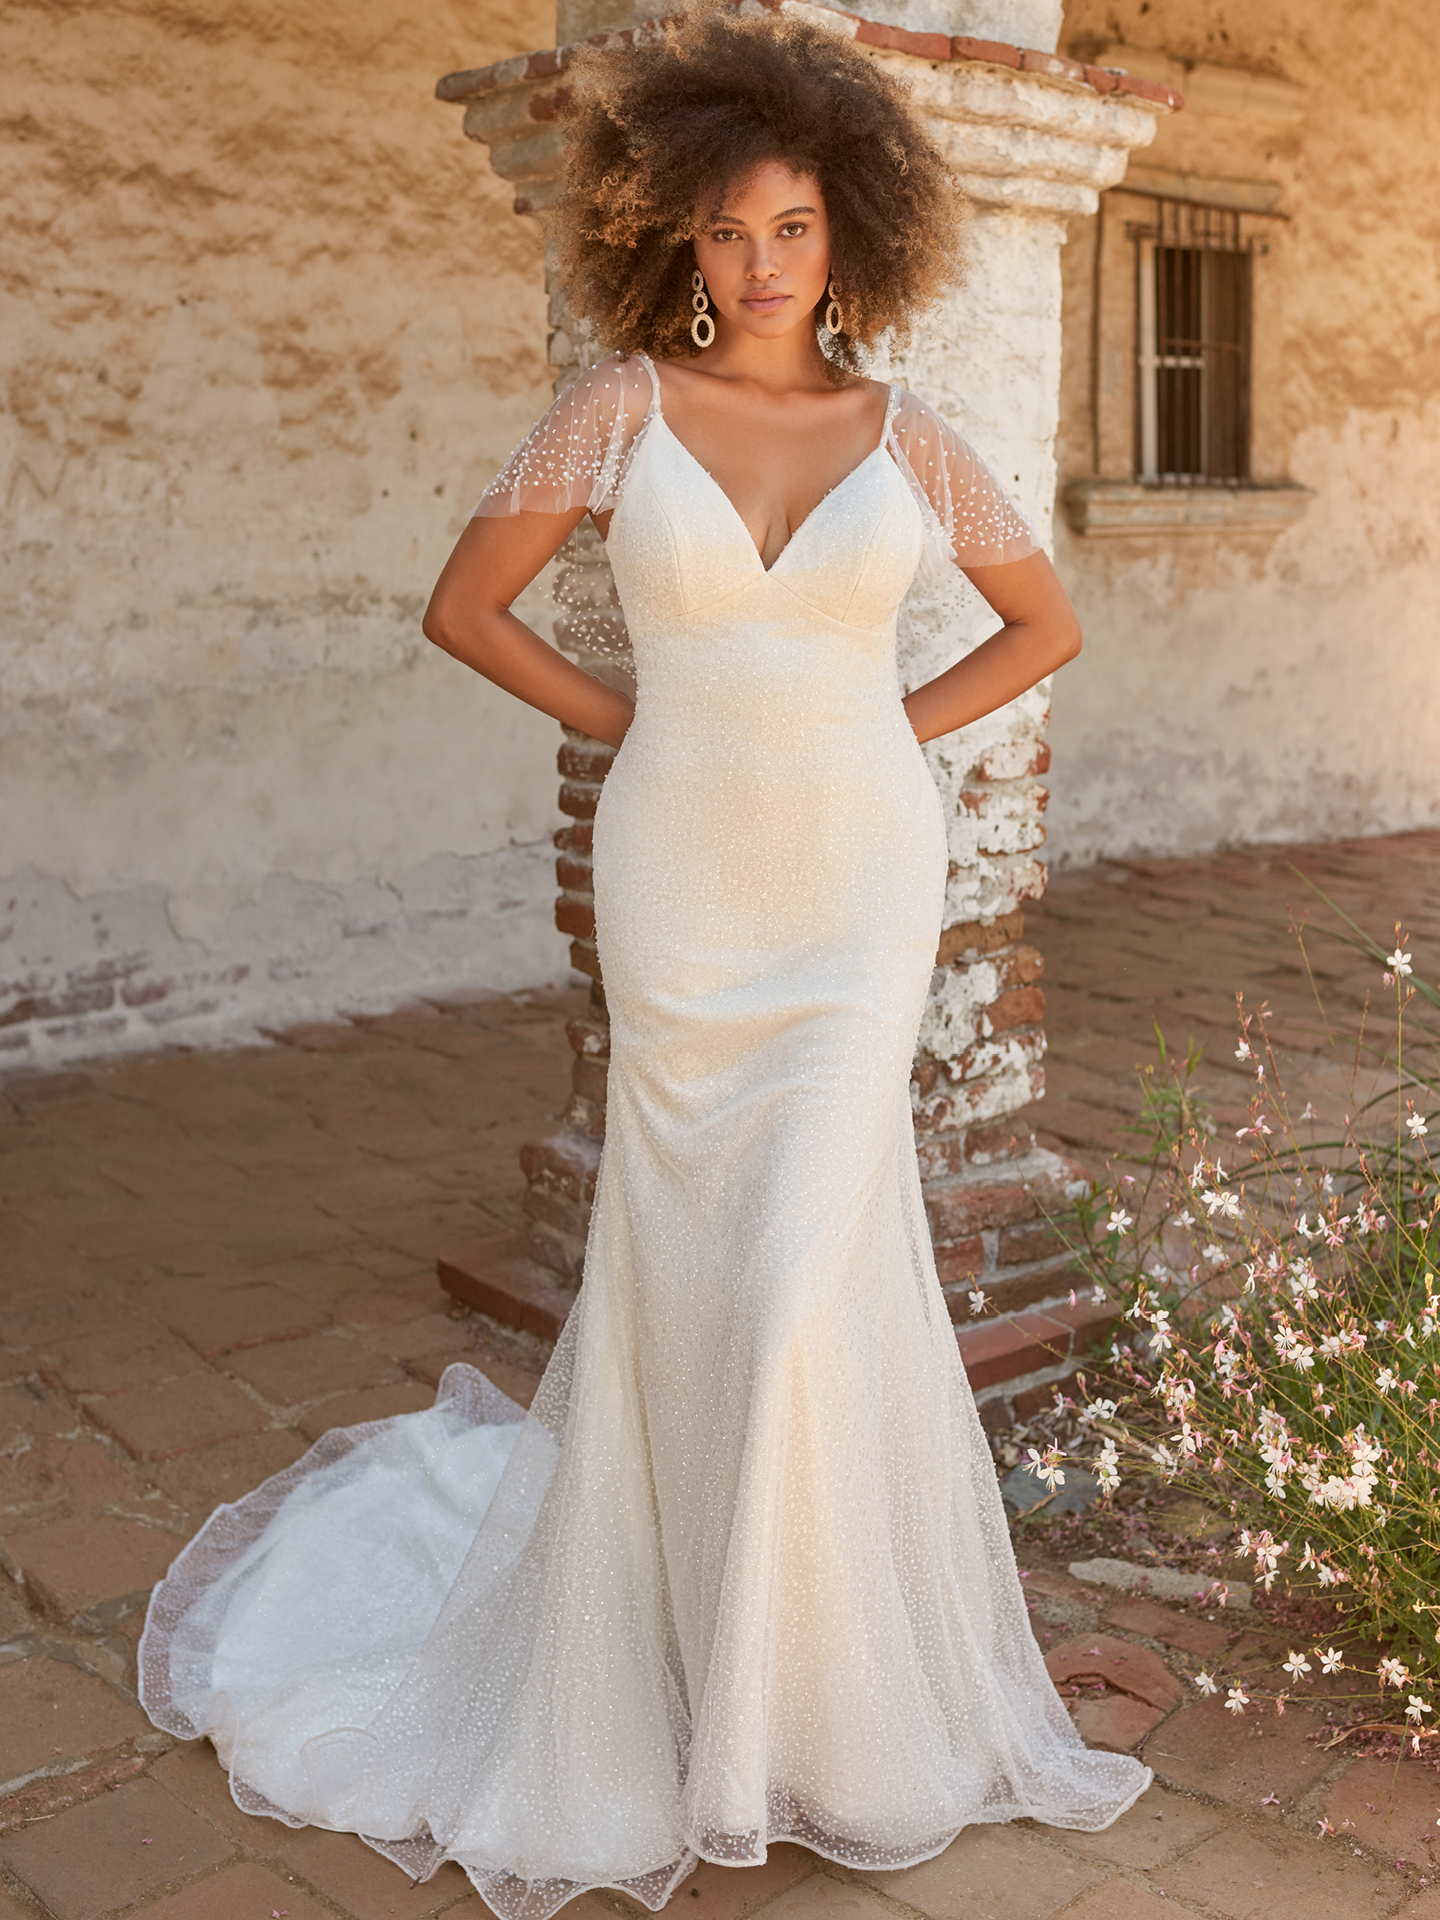 Bride In Pearl Bridal Cape Called Sigourney With Wedding Dress Called Gina By Maggie Sottero